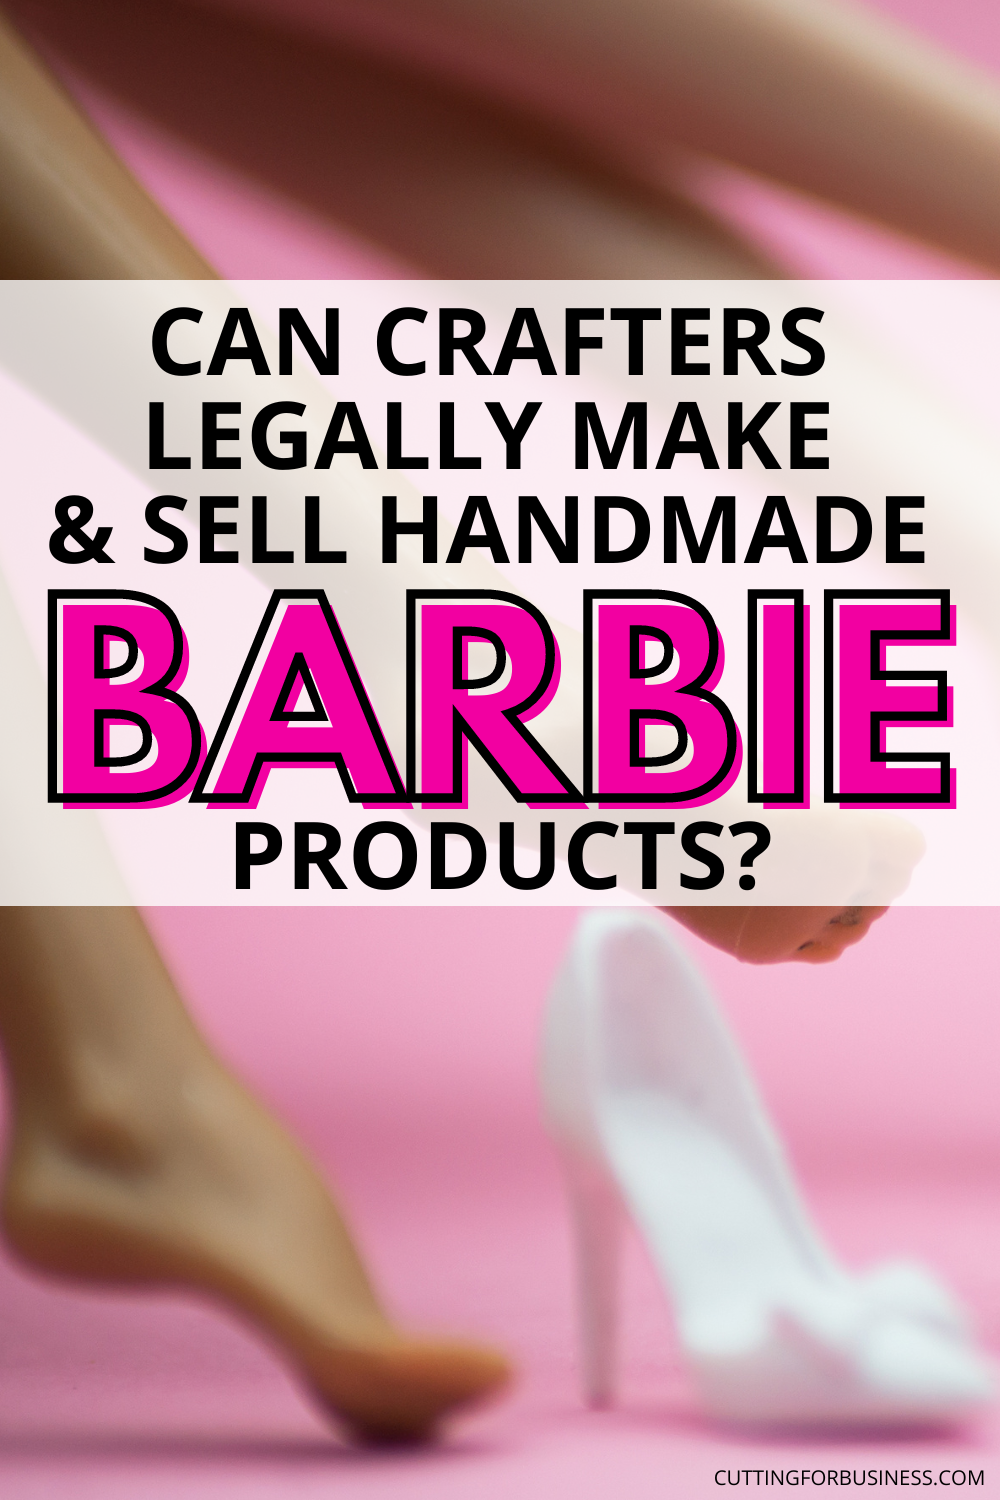 Can Crafters Make and Sell Handmade Barbie Products? - cuttingforbusiness.com.